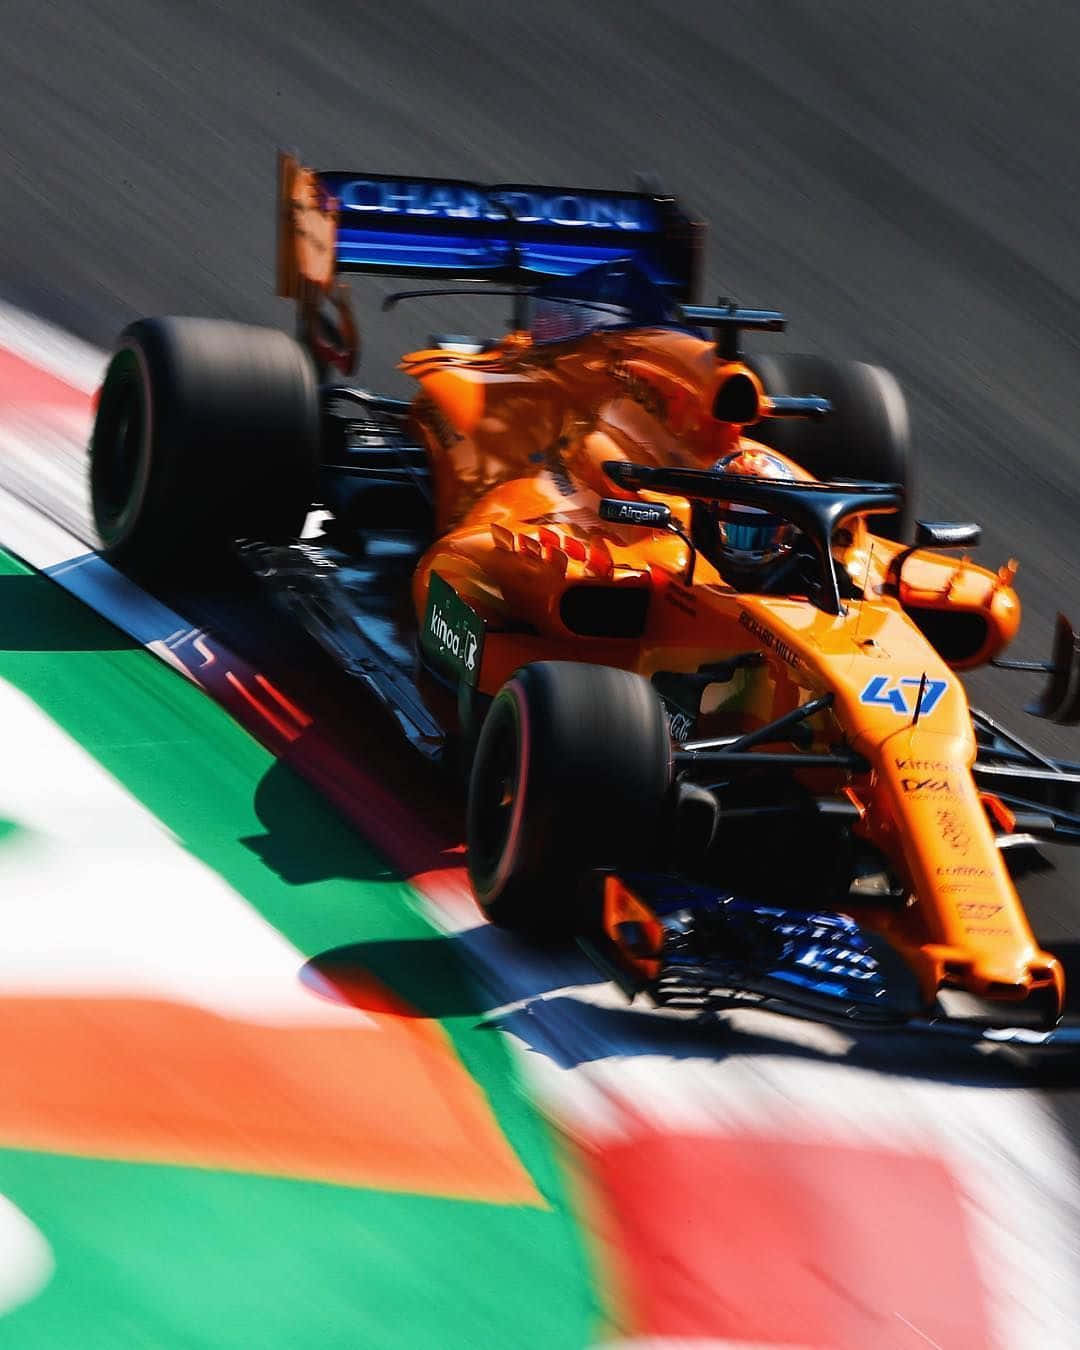 F1 driver Lando Norris looking focused and determined on the track